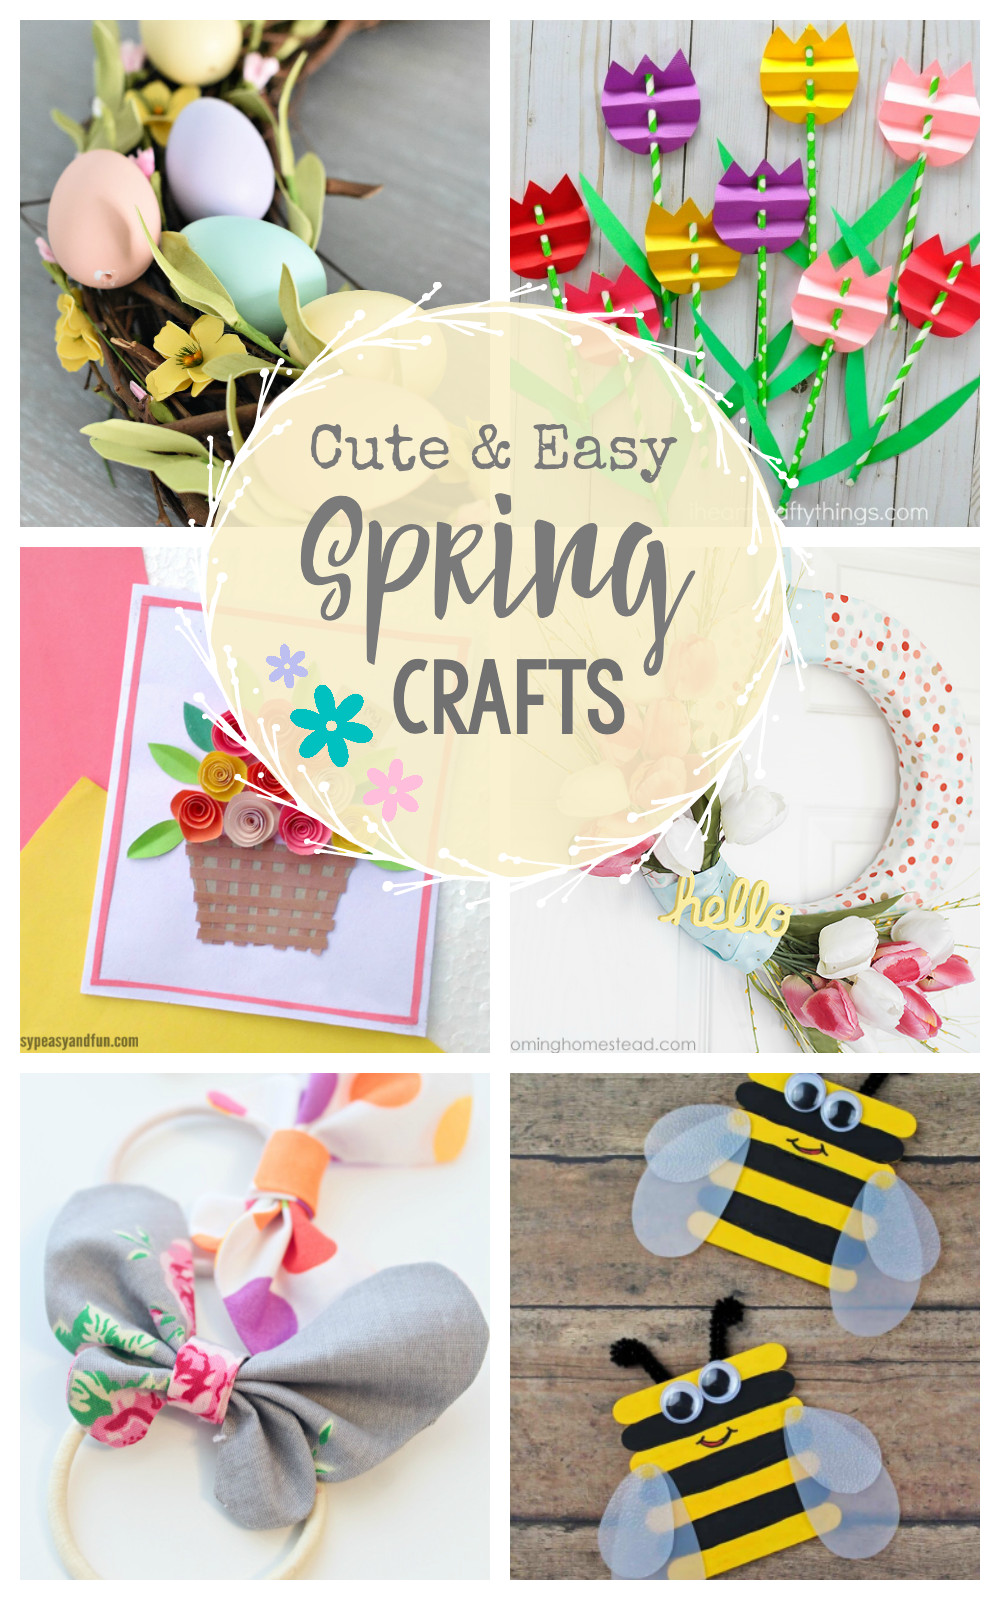 Cute Easy Crafts For Kids
 Cute & Easy Spring Crafts to Make Crazy Little Projects